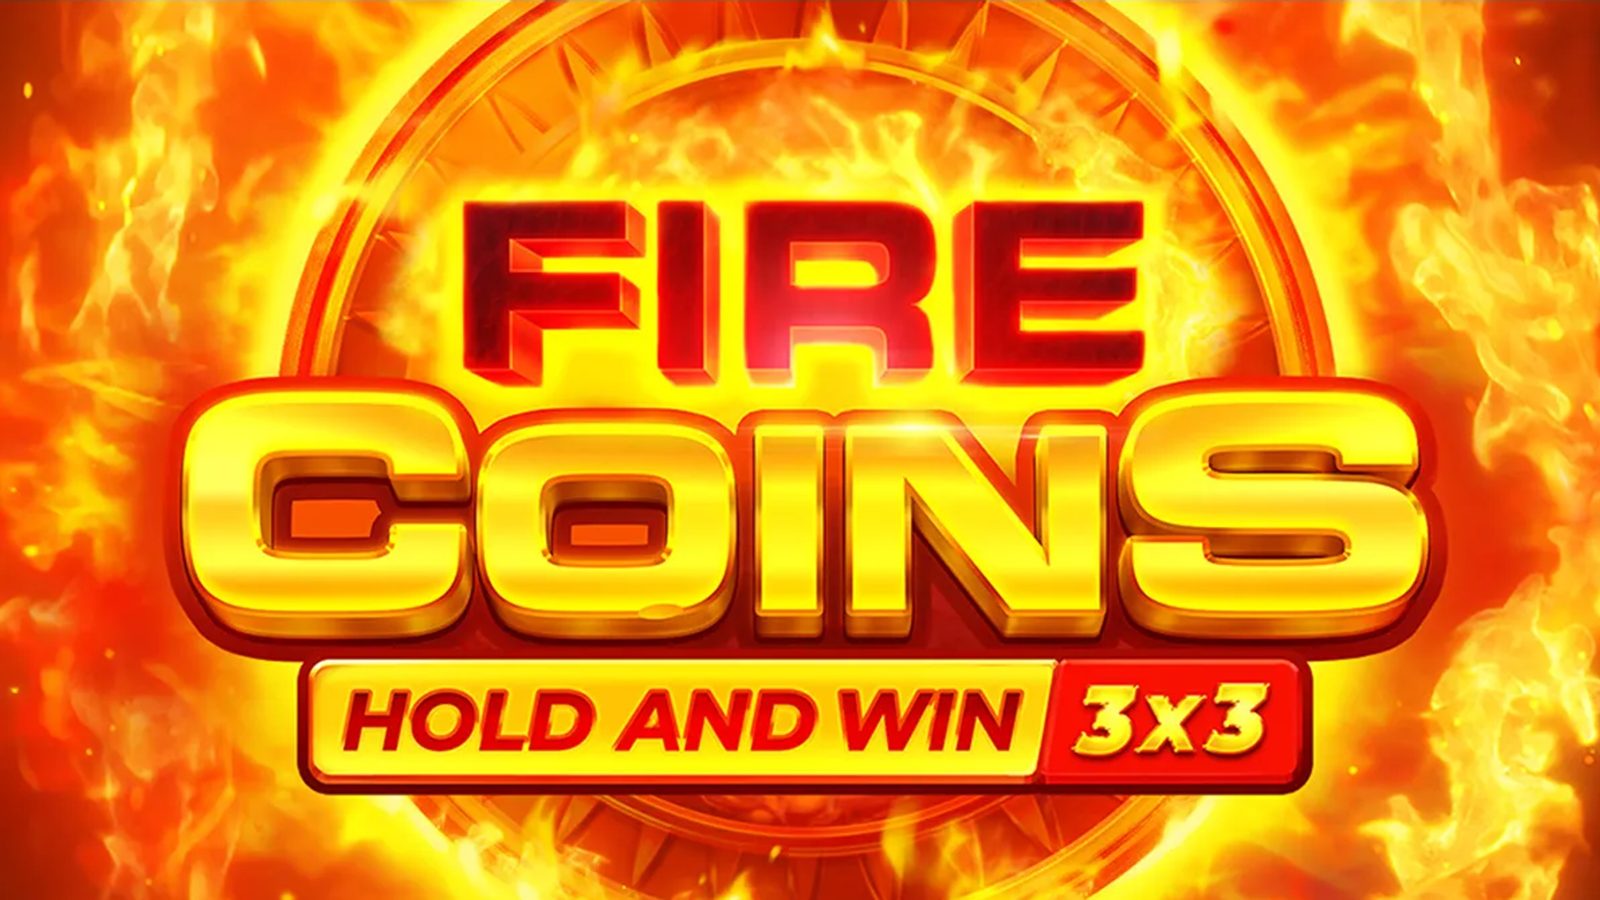 Fire Coins - Playson's Hot New Slot